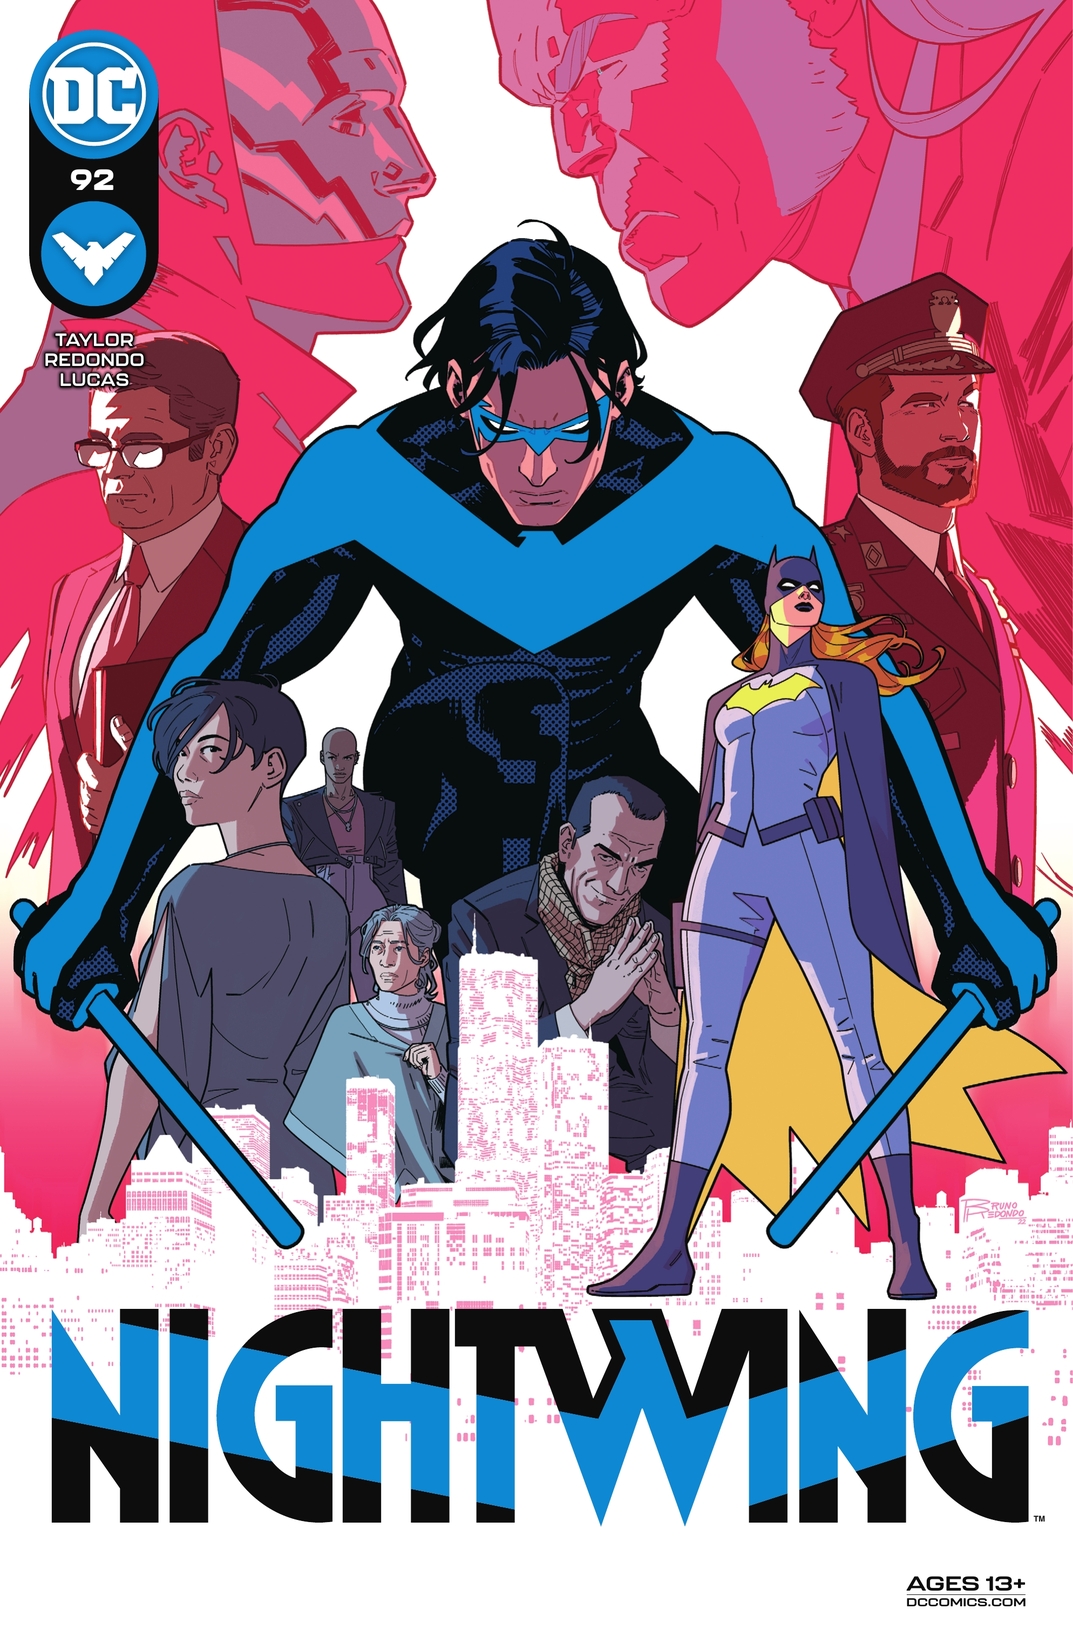 Nightwing (2016-) #92 preview images